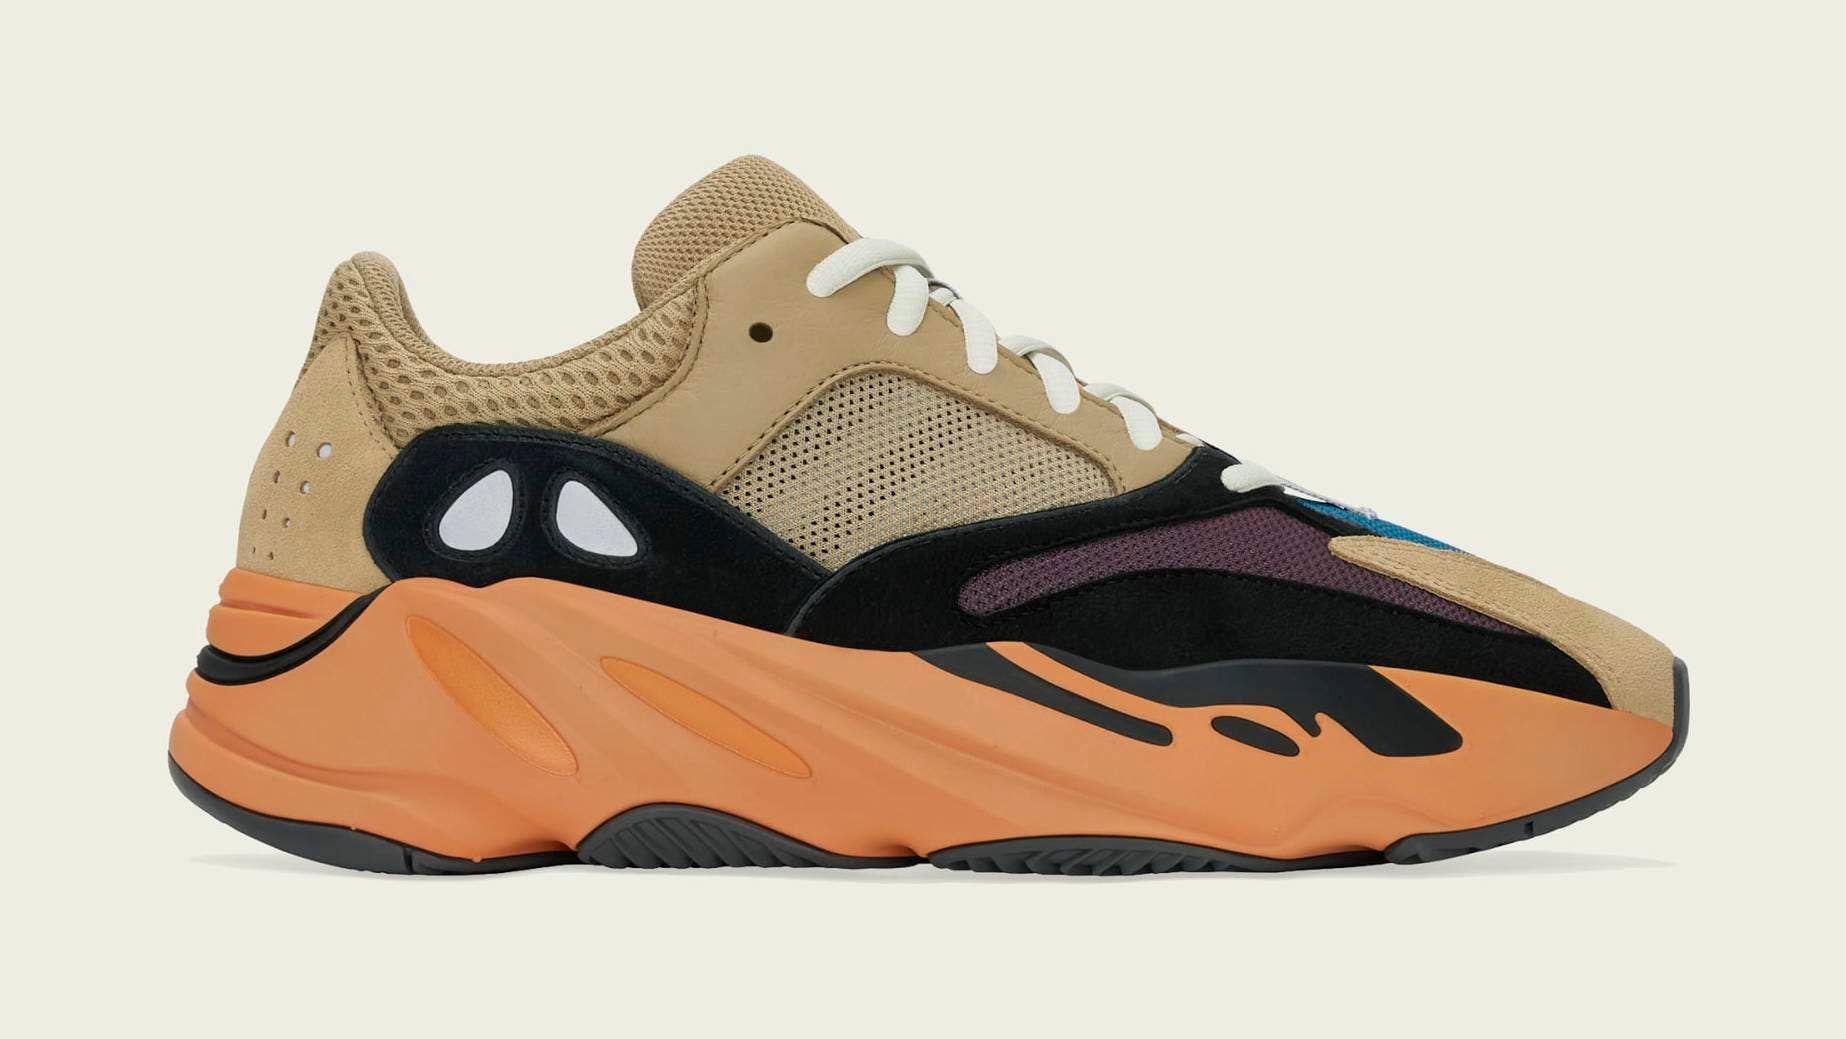 Adidas Yeezy Boost 700 'Enflame Amber' GW0297 Lateral